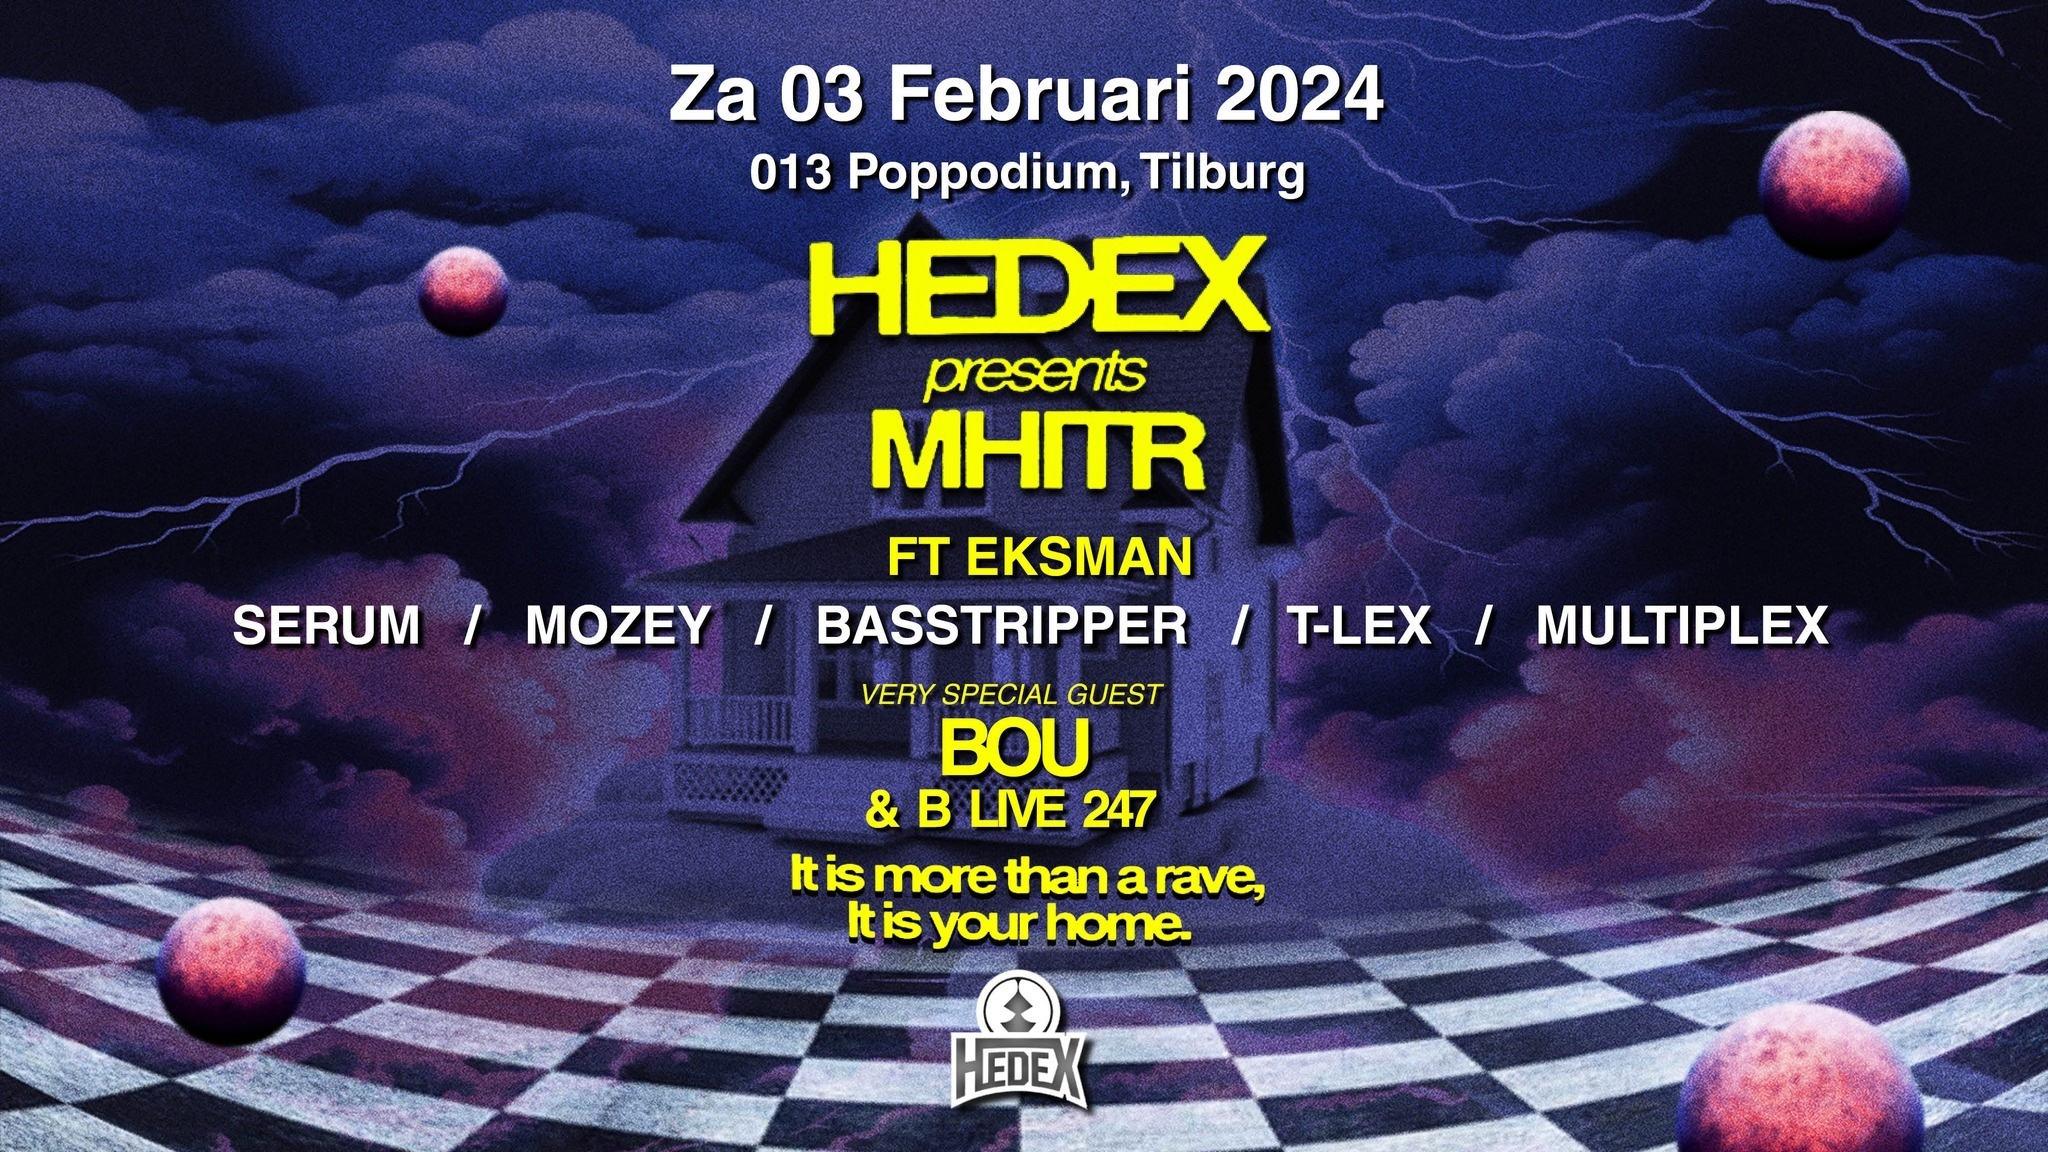 hedex my home is the rave tour